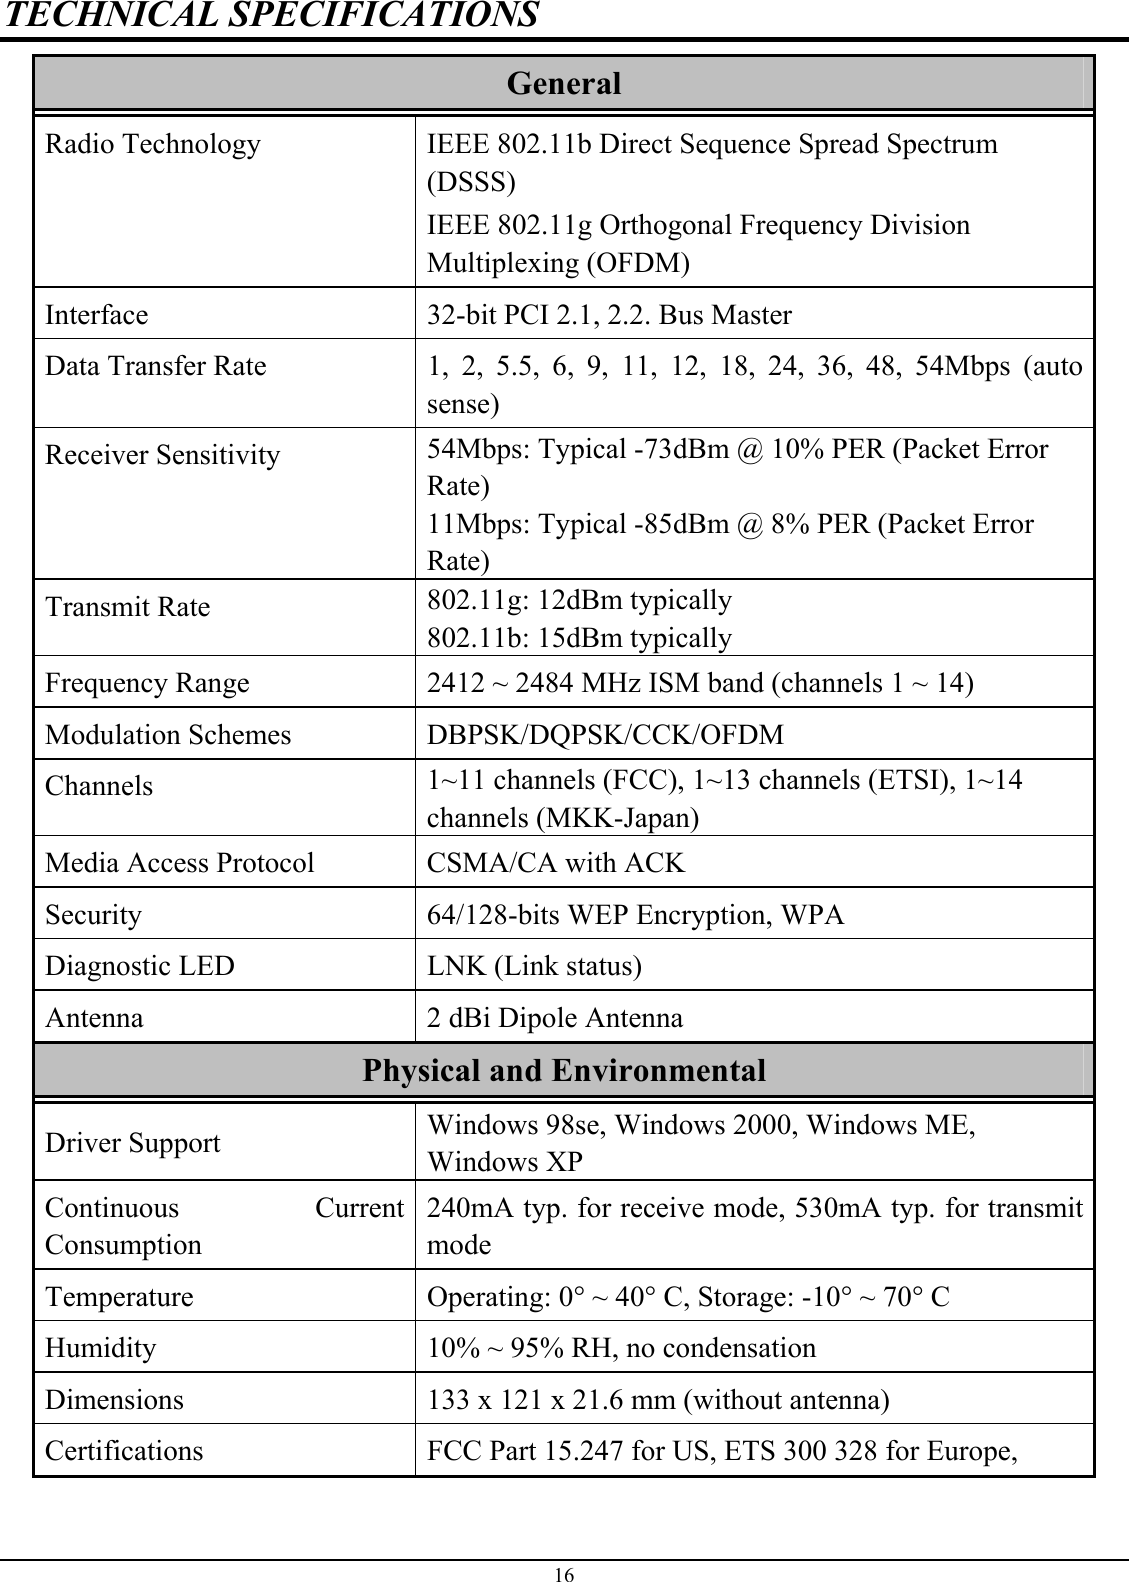 TECHNICAL SPECIFICATIONS GeneralRadio Technology  IEEE 802.11b Direct Sequence Spread Spectrum(DSSS)IEEE 802.11g Orthogonal Frequency Division Multiplexing (OFDM) Interface 32-bit PCI 2.1, 2.2. Bus Master Data Transfer Rate 1, 2, 5.5, 6, 9, 11, 12, 18, 24, 36, 48, 54Mbps (auto sense)Receiver Sensitivity  54Mbps: Typical -73dBm @ 10% PER (Packet Error Rate)11Mbps: Typical -85dBm @ 8% PER (Packet Error Rate)Transmit Rate  802.11g: 12dBm typically 802.11b: 15dBm typically Frequency Range  2412 ~ 2484 MHz ISM band (channels 1 ~ 14) Modulation Schemes DBPSK/DQPSK/CCK/OFDMChannels 1~11 channels (FCC), 1~13 channels (ETSI), 1~14 channels (MKK-Japan) Media Access Protocol  CSMA/CA with ACK Security 64/128-bits WEP Encryption, WPA Diagnostic LED  LNK (Link status) Antenna 2 dBi Dipole Antenna Physical and EnvironmentalDriver Support  Windows 98se, Windows 2000, Windows ME, Windows XP Continuous CurrentConsumption240mA typ. for receive mode, 530mA typ. for transmitmodeTemperature Operating: 0q ~ 40q C, Storage: -10q ~ 70q C Humidity 10% ~ 95% RH, no condensation Dimensions 133 x 121 x 21.6 mm (without antenna) Certifications FCC Part 15.247 for US, ETS 300 328 for Europe,16